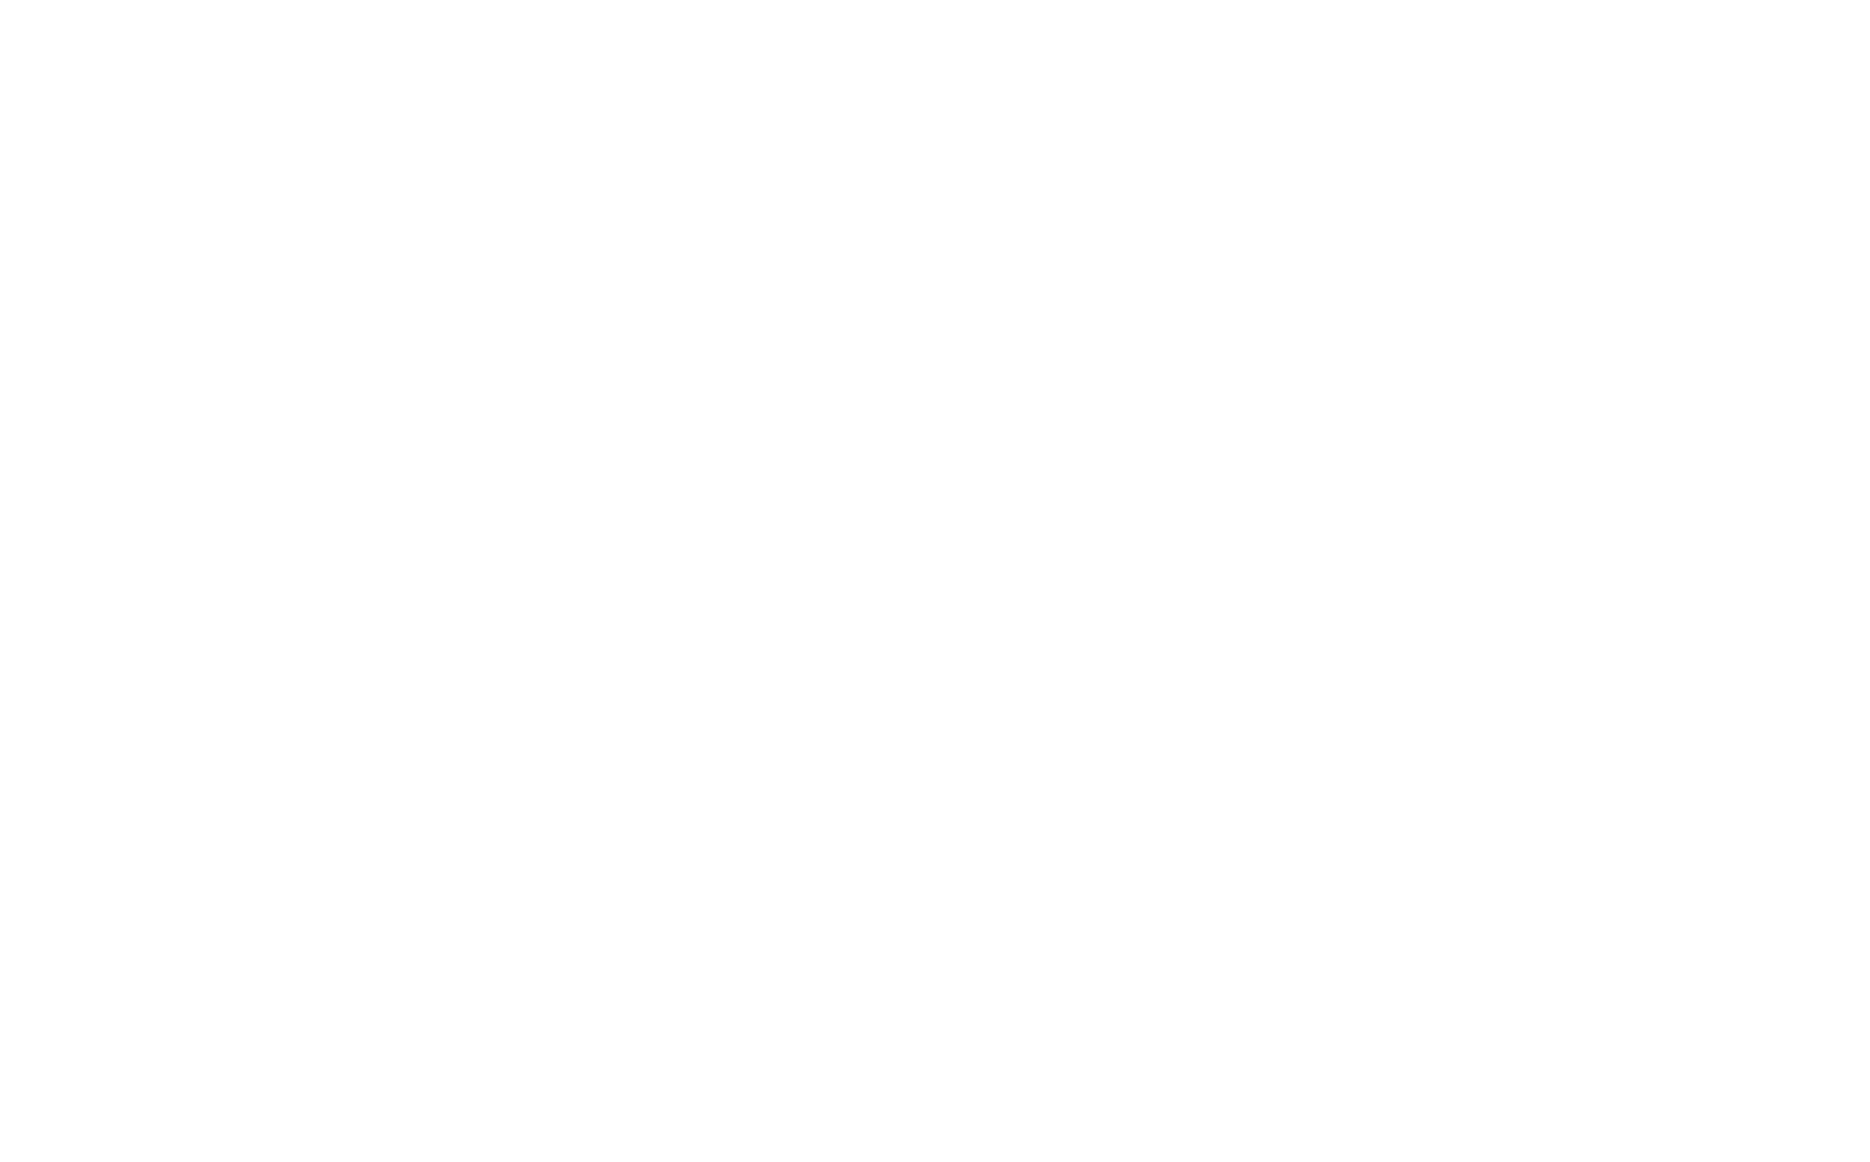 B-Outsourced